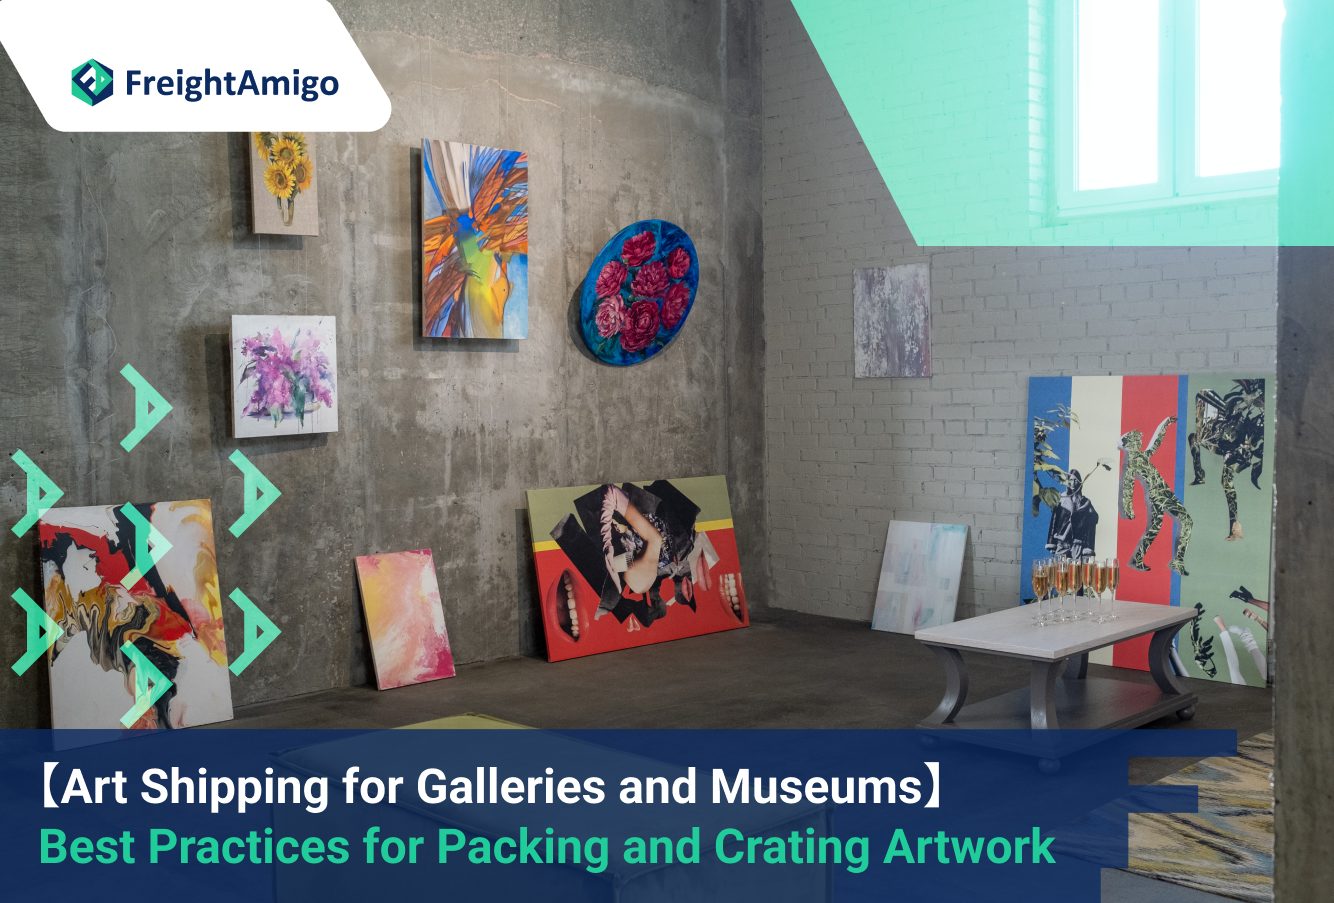 Art Shipping for Galleries and Museums: Best Practices for Packing and Crating Artwork